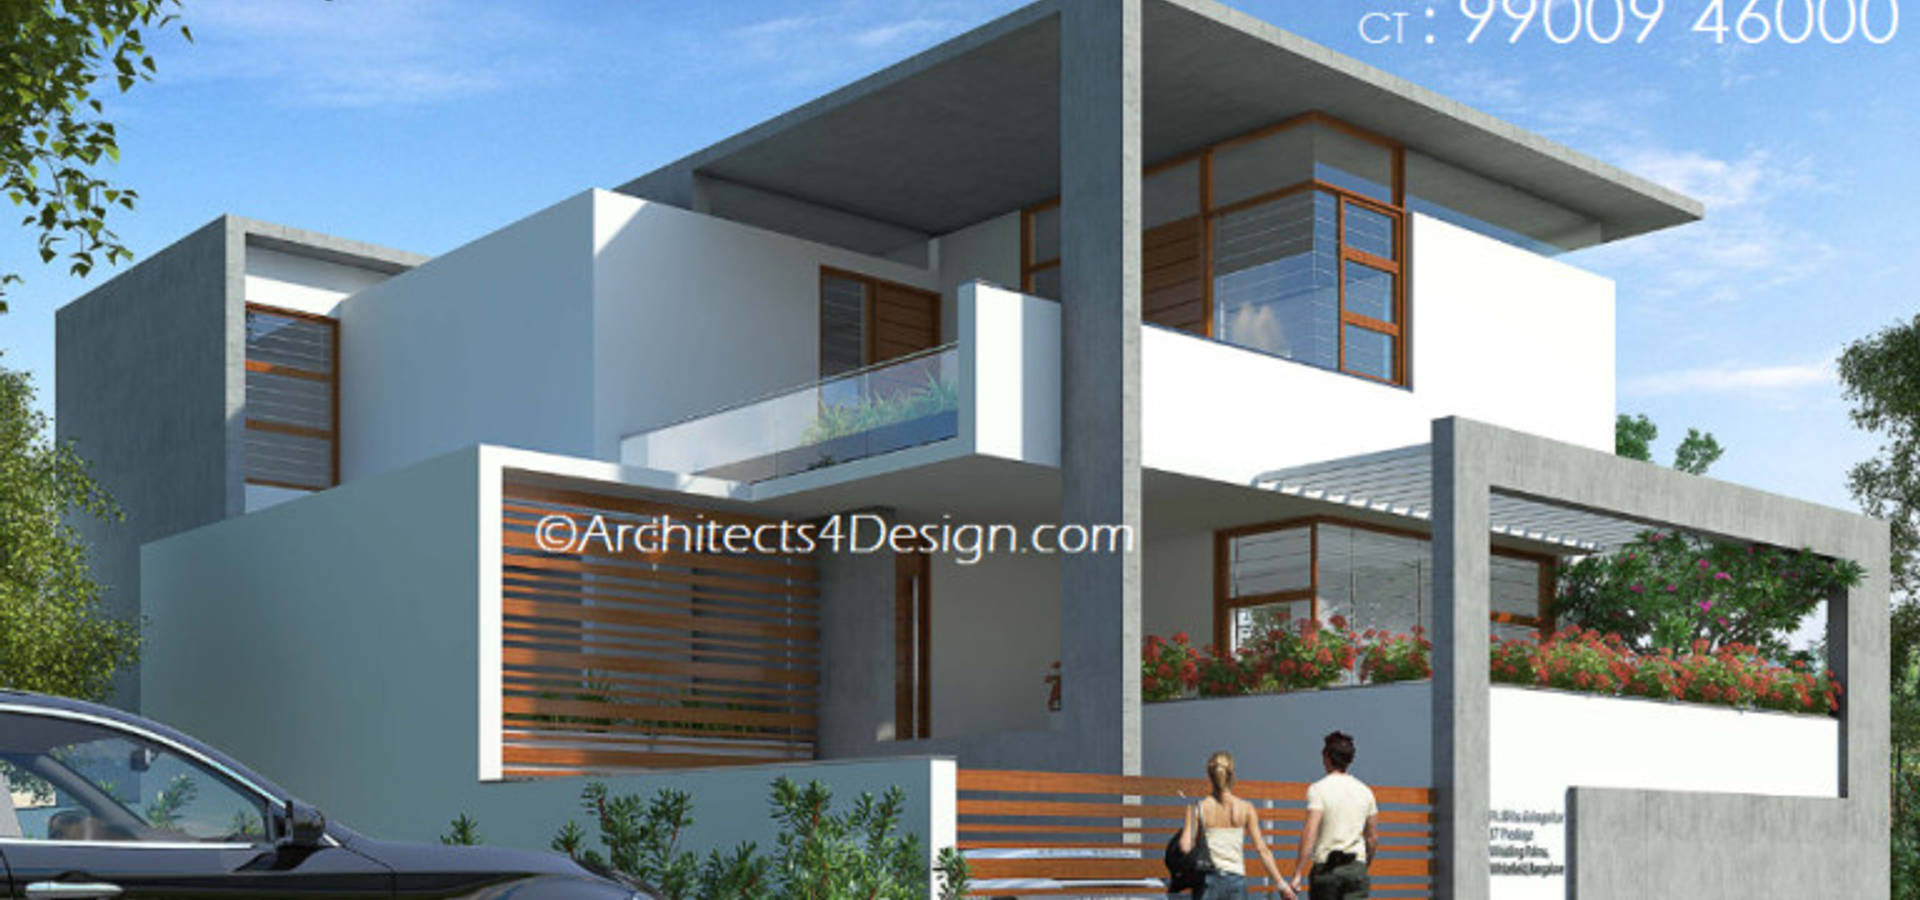 A4 ARCHITECTS IN BANGALORE